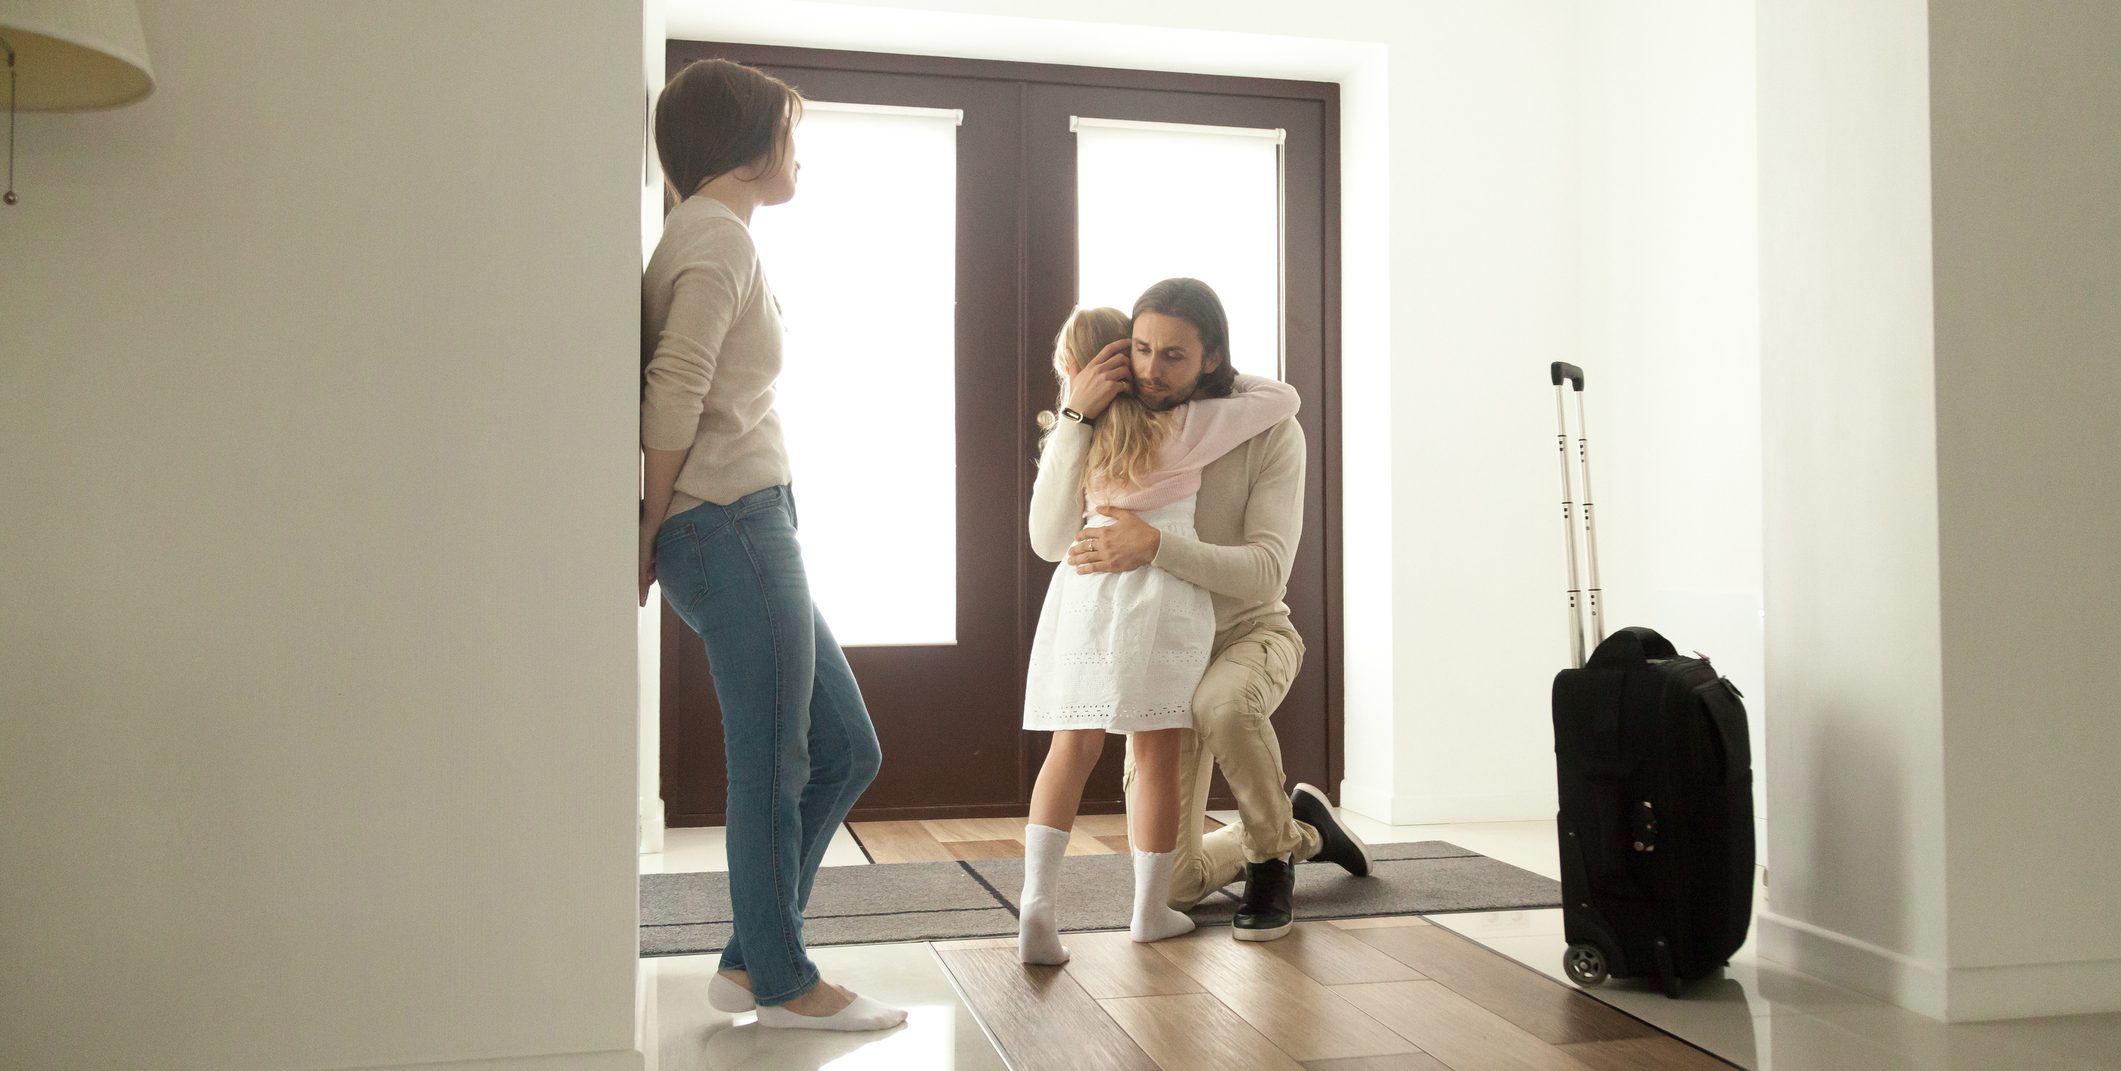 Let a Lake Charles child custody attorney help in your case.